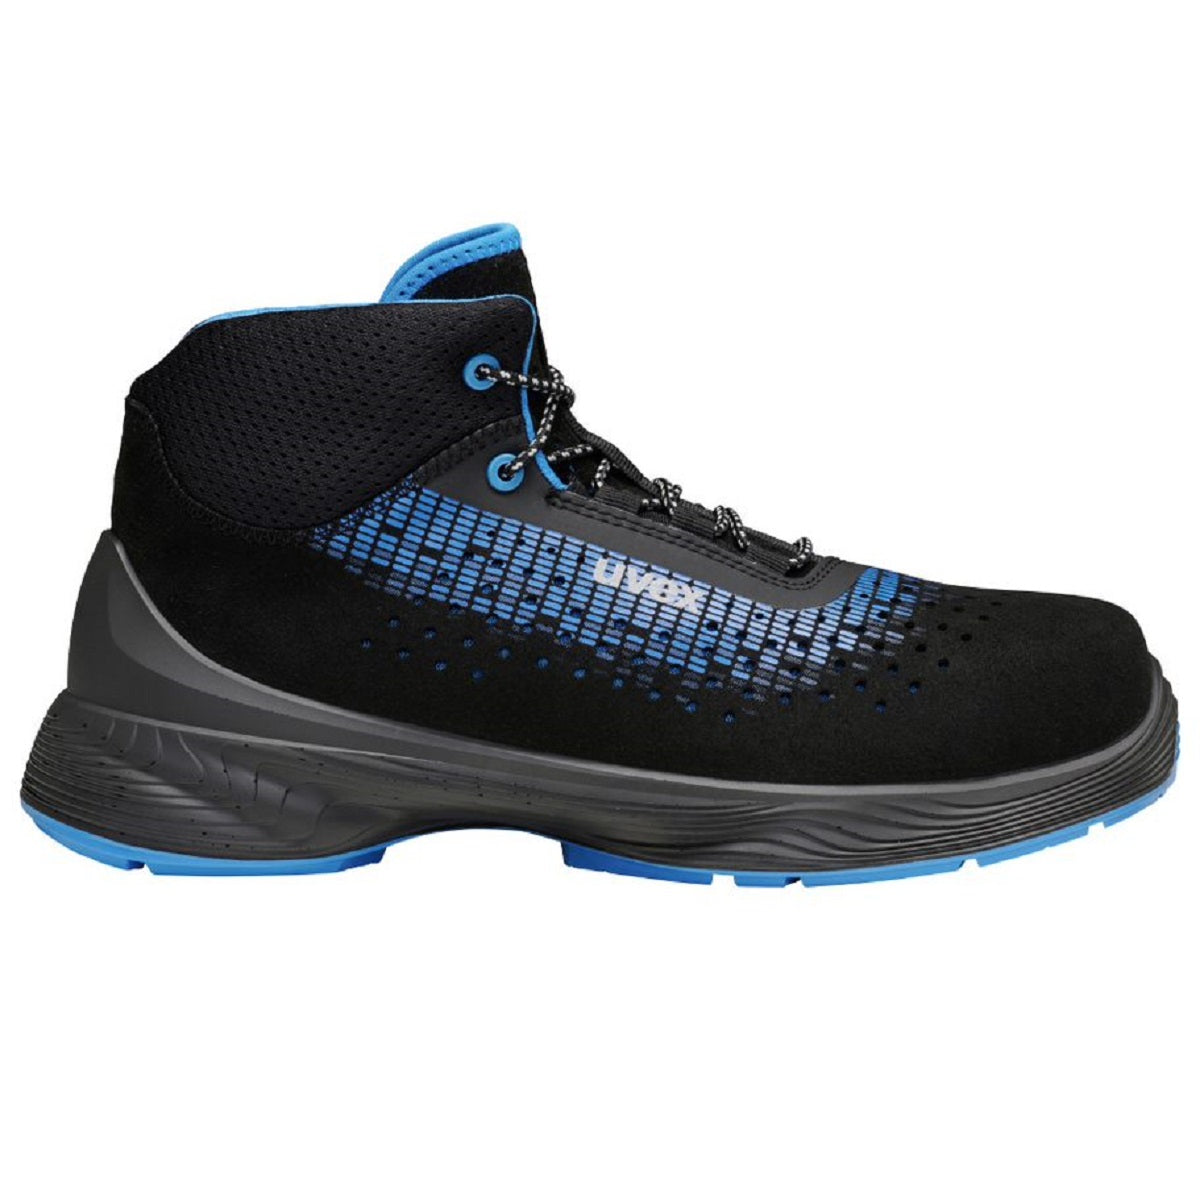 uvex 1 68381 G2 safety boots. Black Blue perforated microsuede ESD 100% Non-metal, metal-free, composite toe-cap. Comfortable uvex boots protexU